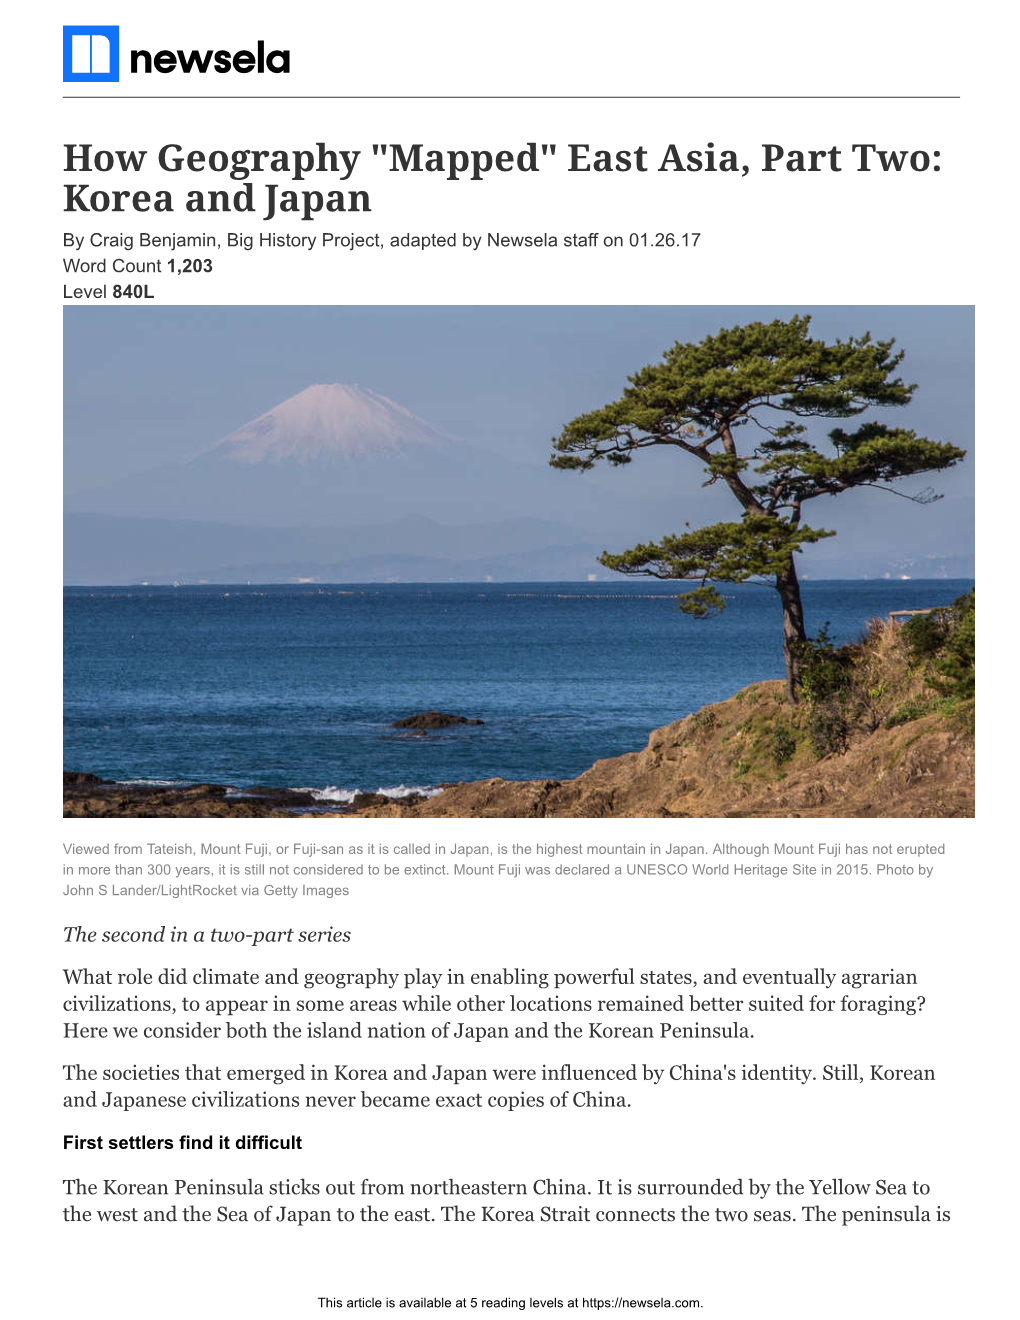 How Geography "Mapped" East Asia, Part Two: Korea and Japan by Craig Benjamin, Big History Project, Adapted by Newsela Staff on 01.26.17 Word Count 1,203 Level 840L